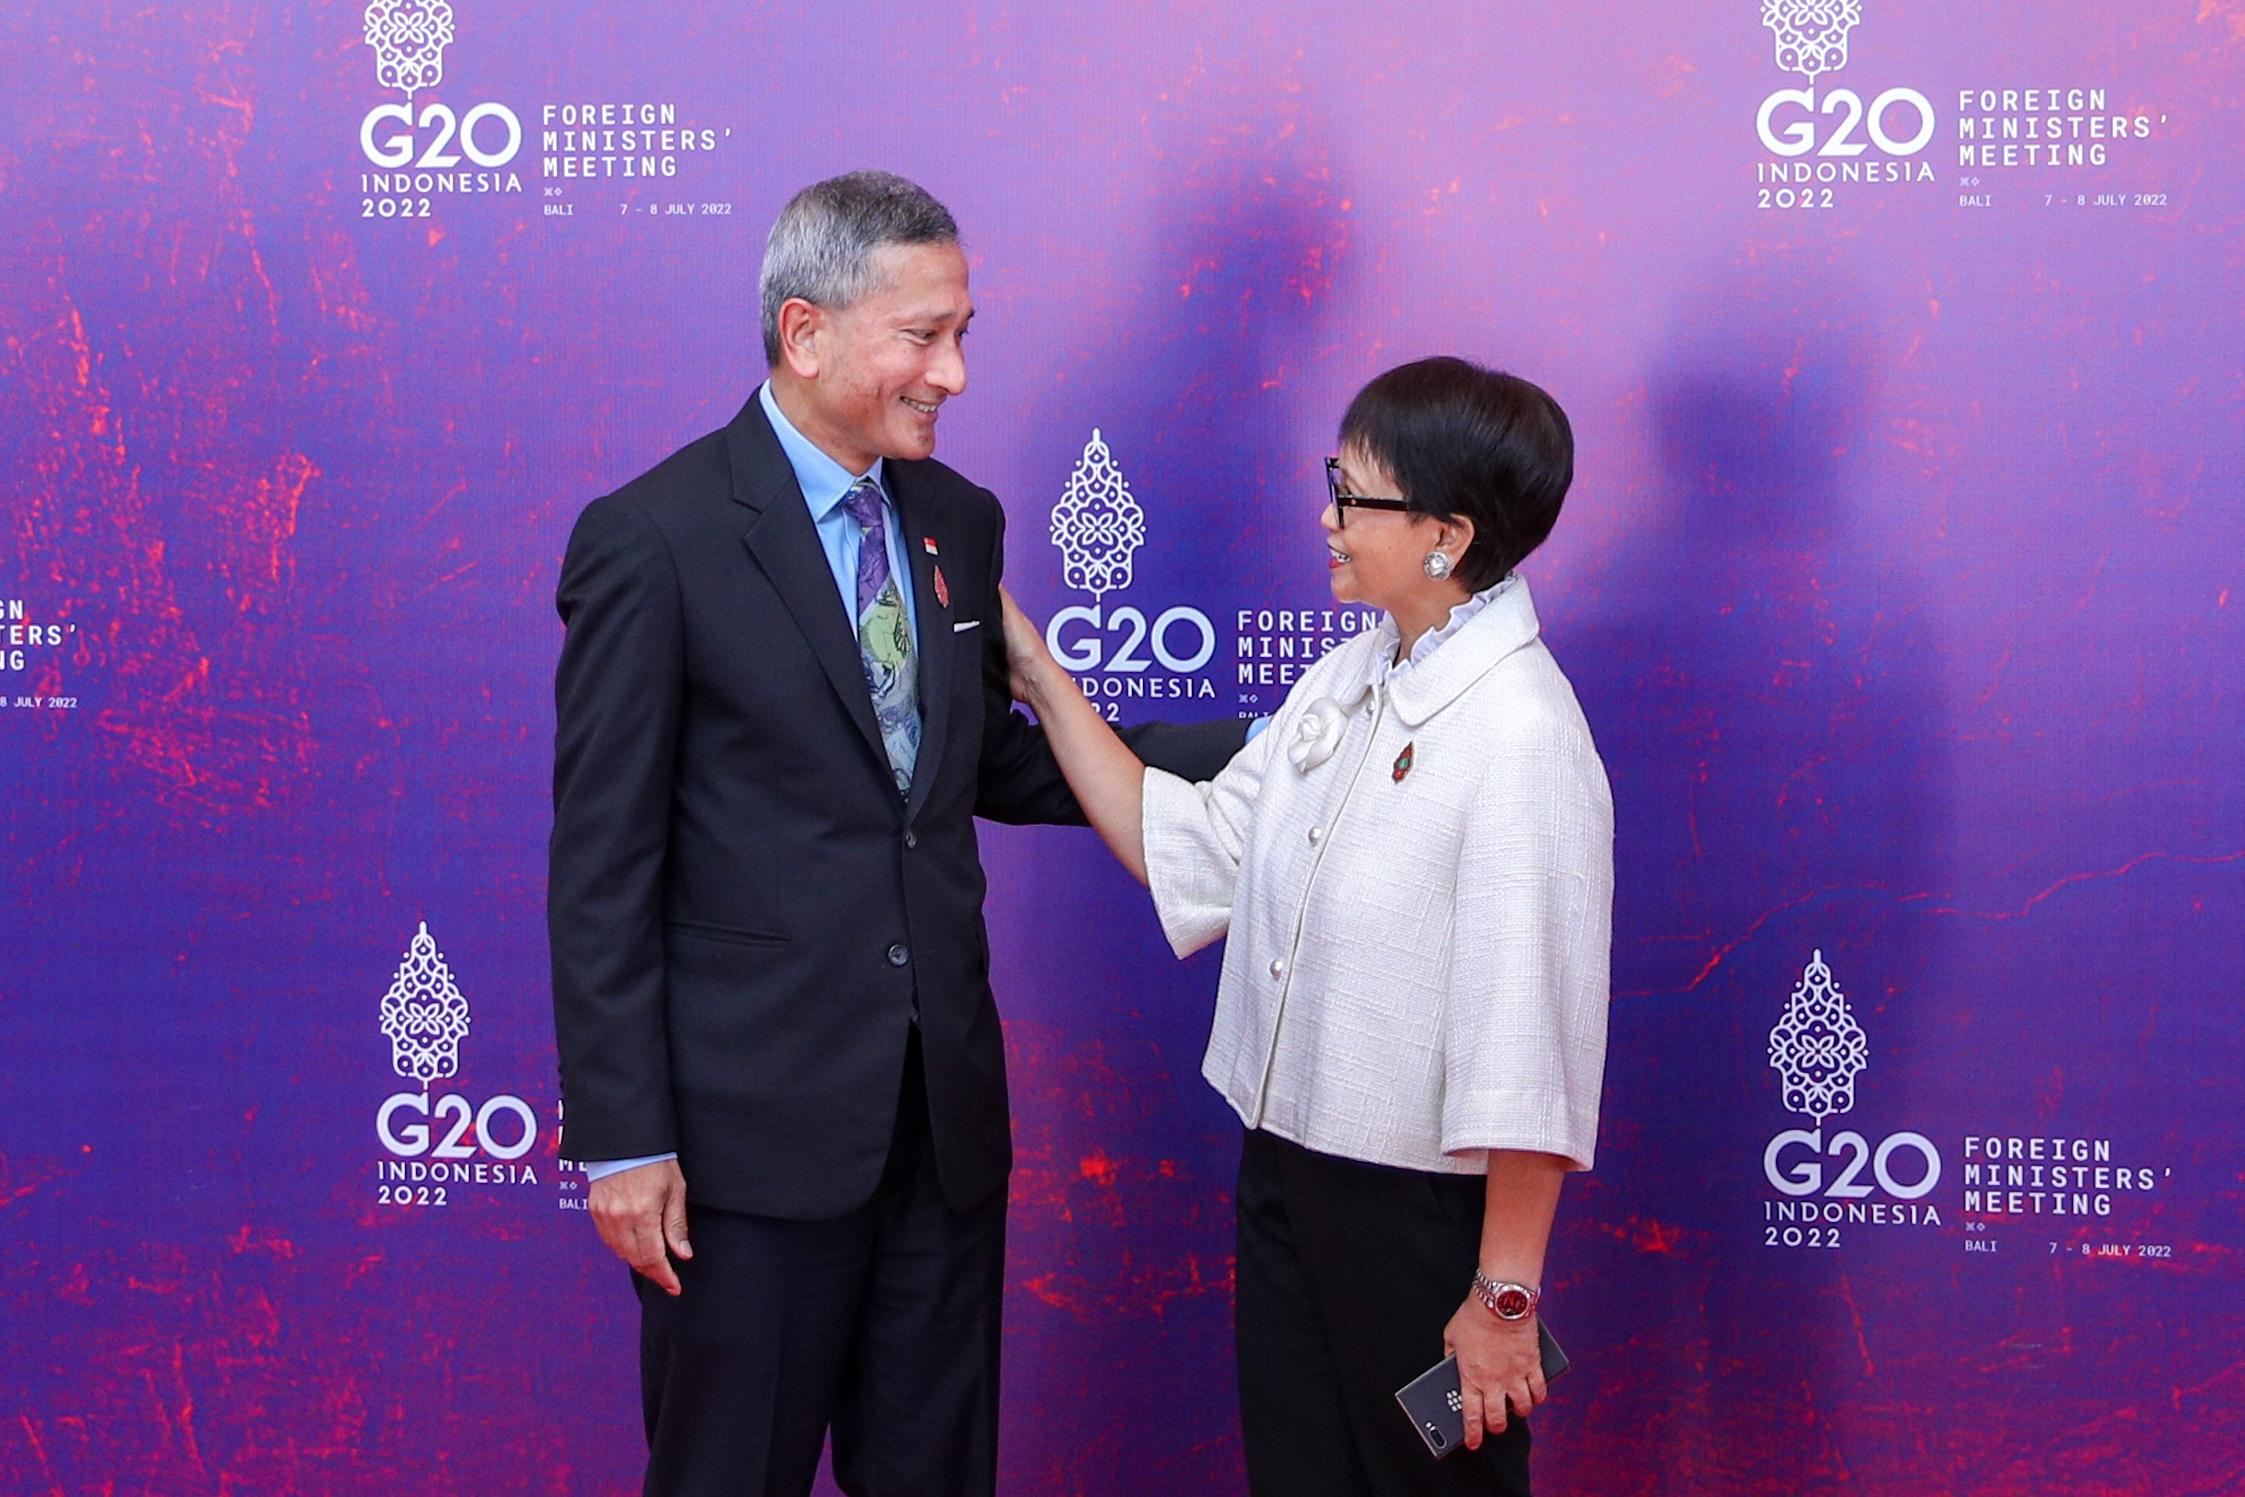 Minister of Foreign Affairs, Engagements of Dr. Vivian Balakrishnan at the G20 Foreign Ministers Meeting, Bali, Indonesia, July 7-8, 2022